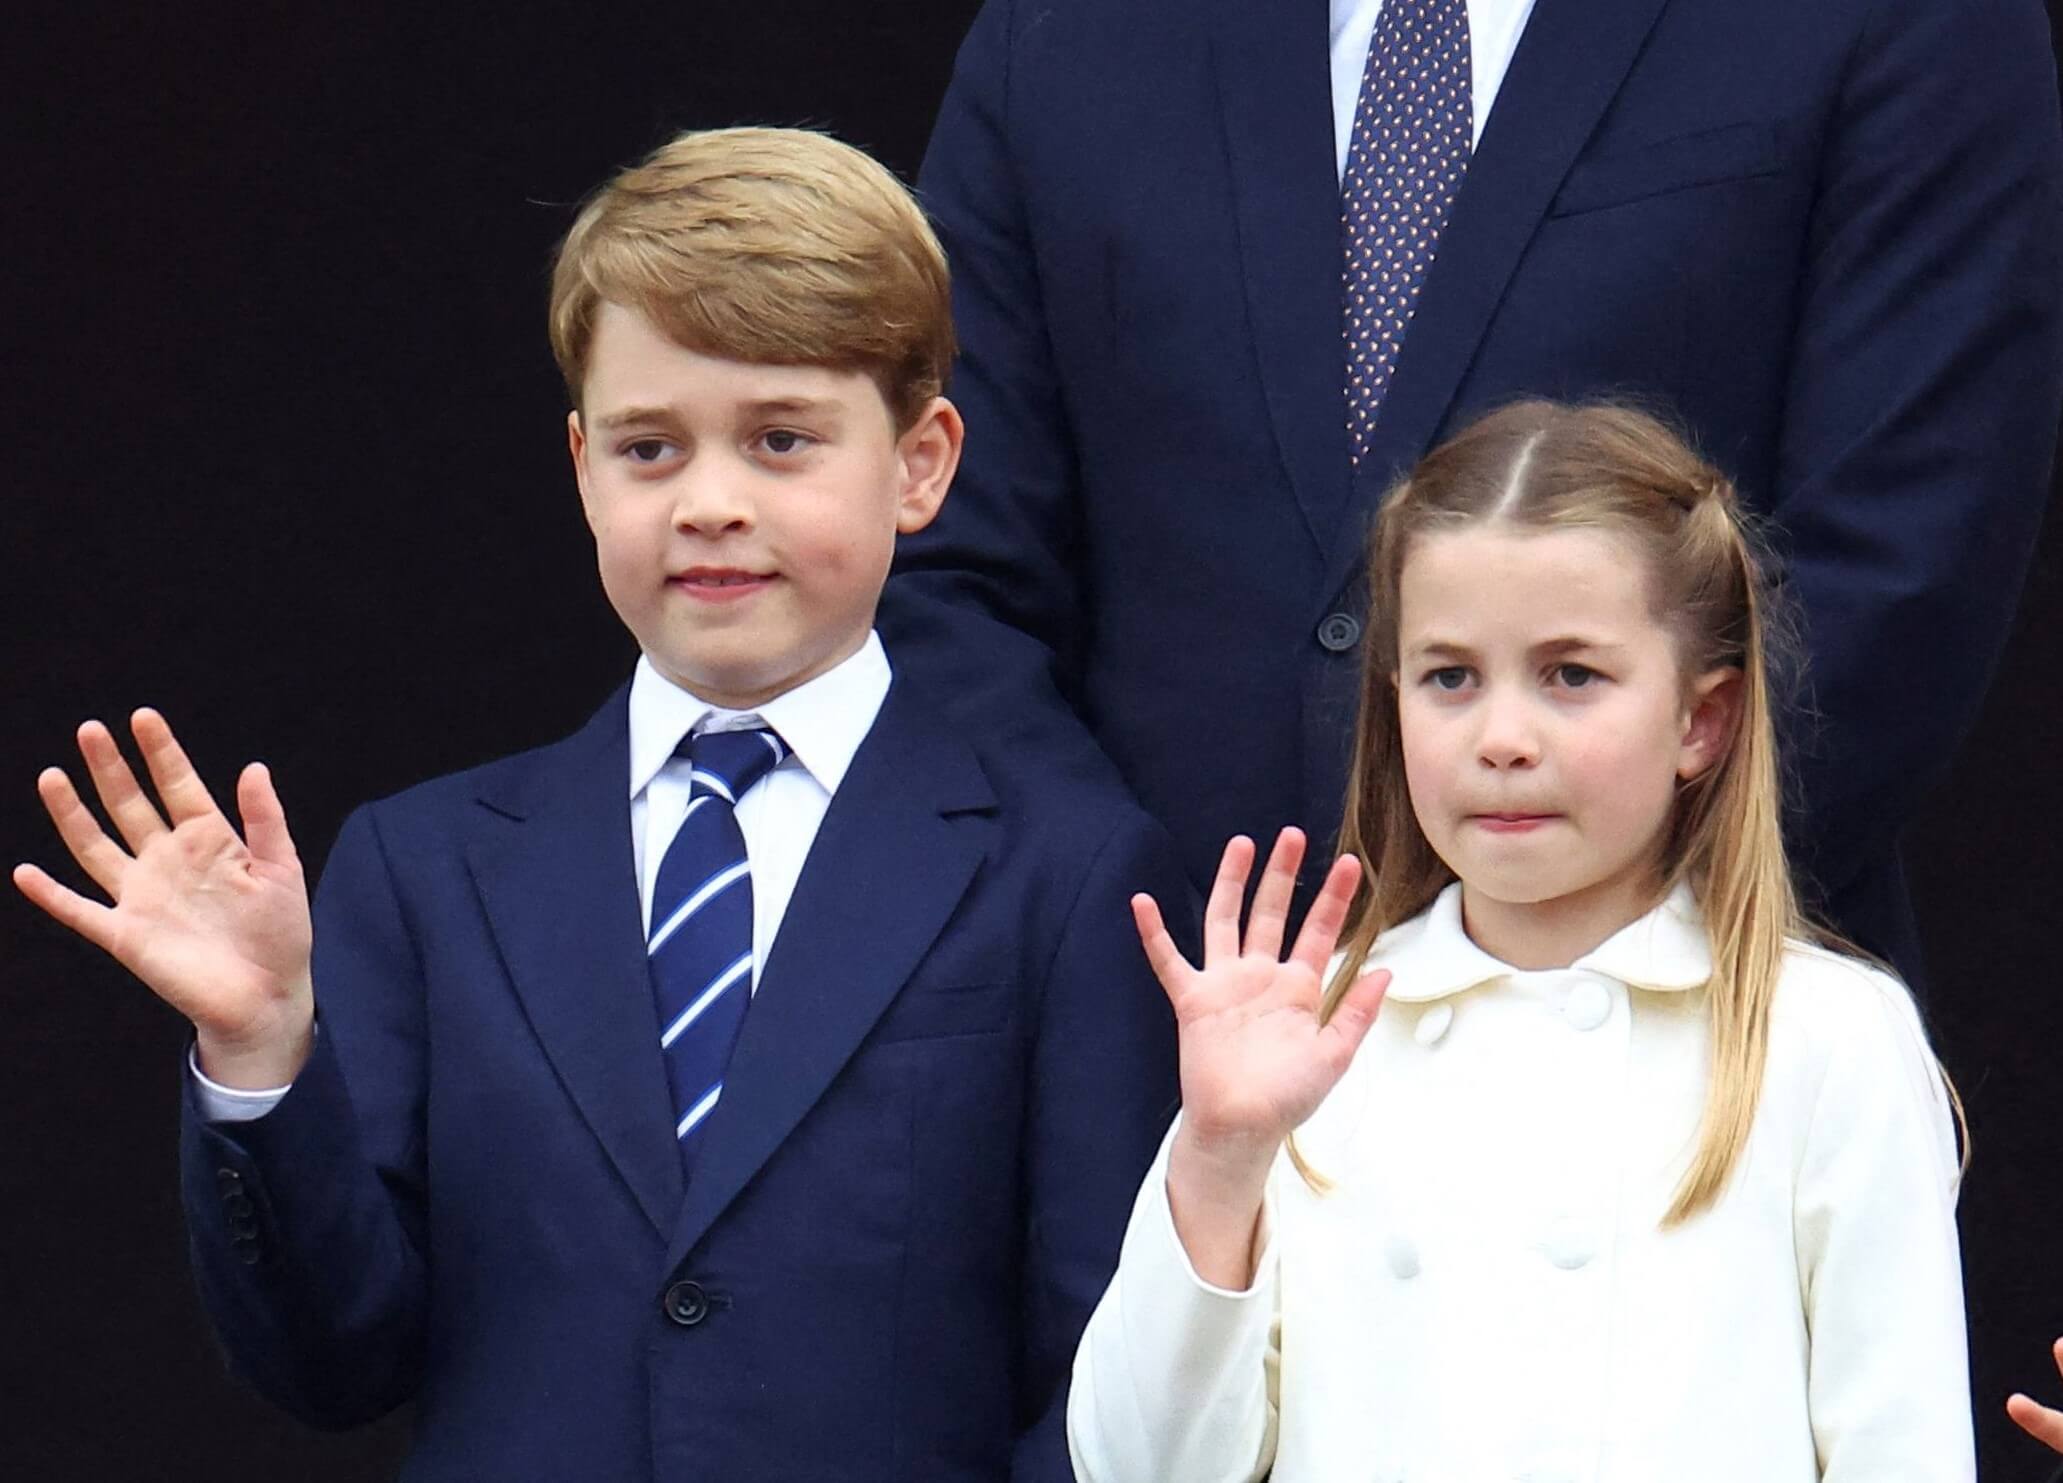 Prince George and Princess Charlotte waving from the balcony of Buckingham Palace at the end of the Platinum Pageant